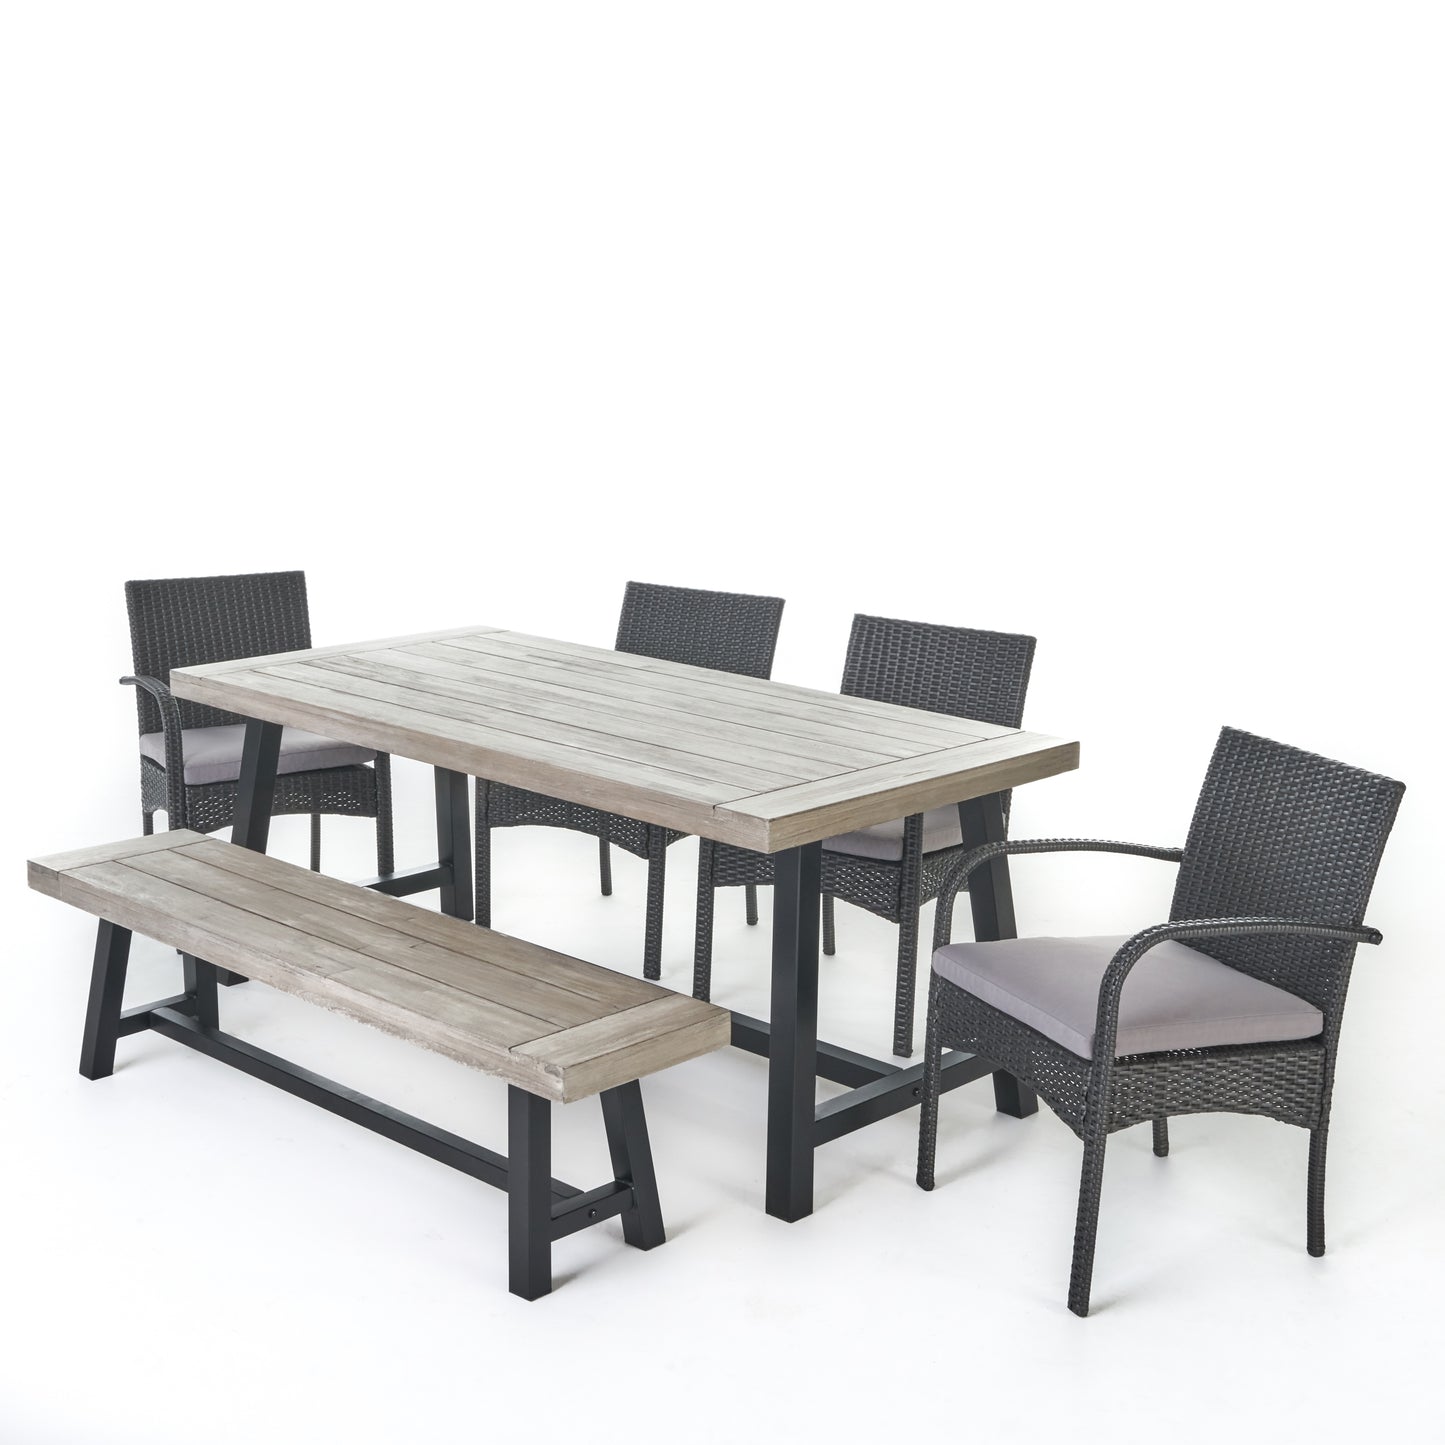 Louise Outdoor 6 Piece Wicker & Acacia Wood Dining Set